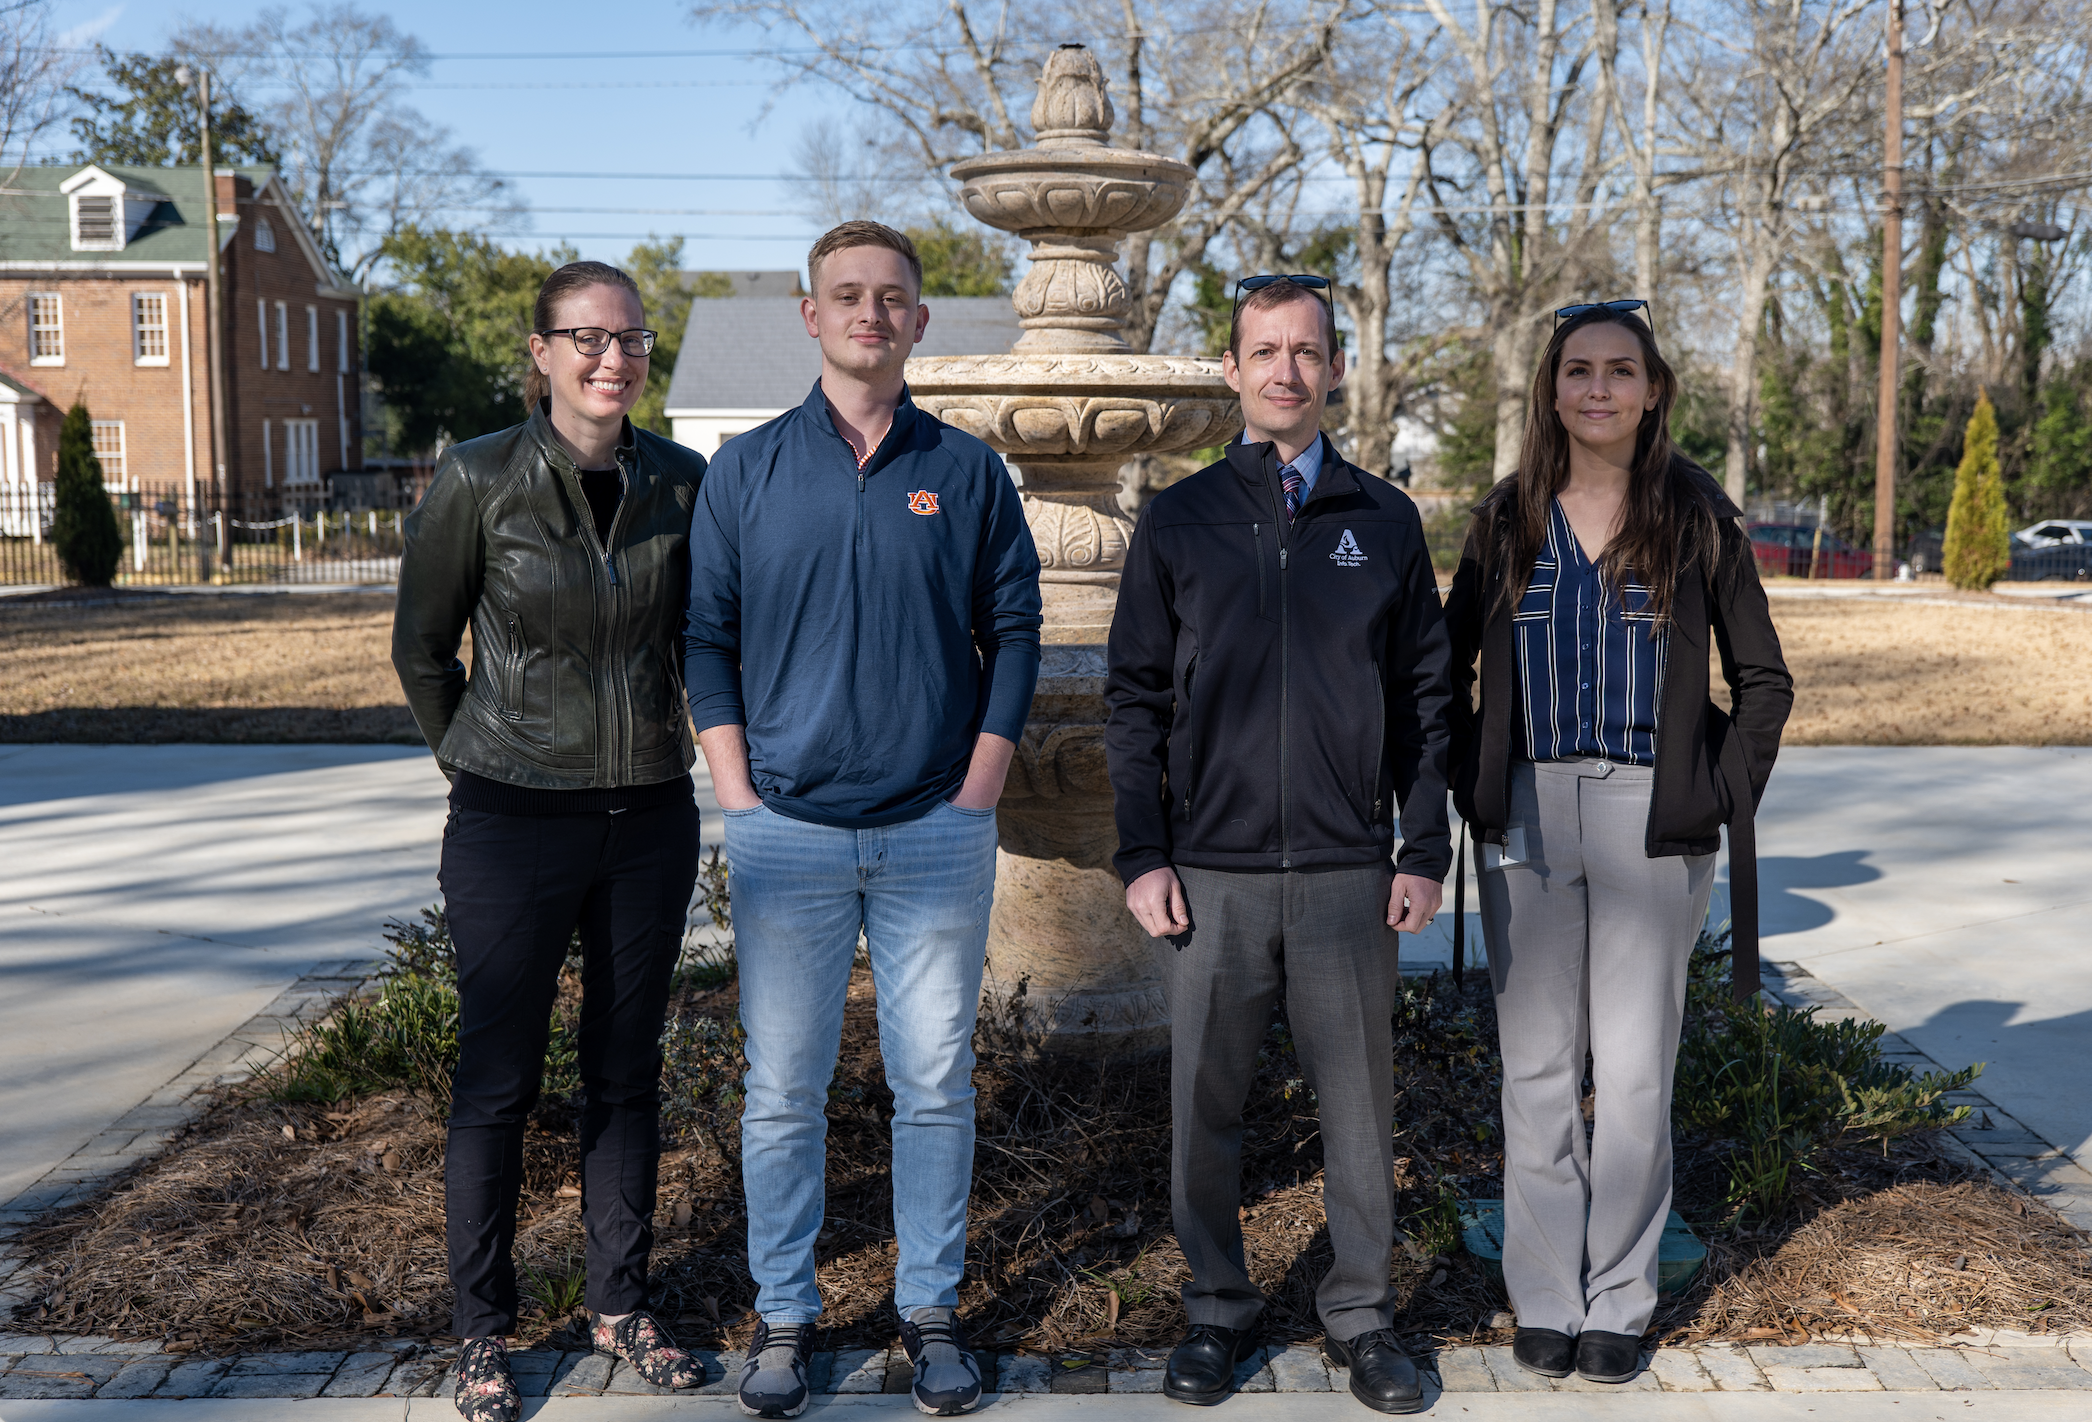 City of Auburn and Auburn University collaborate to implement GIS advancements and applications through fellowship